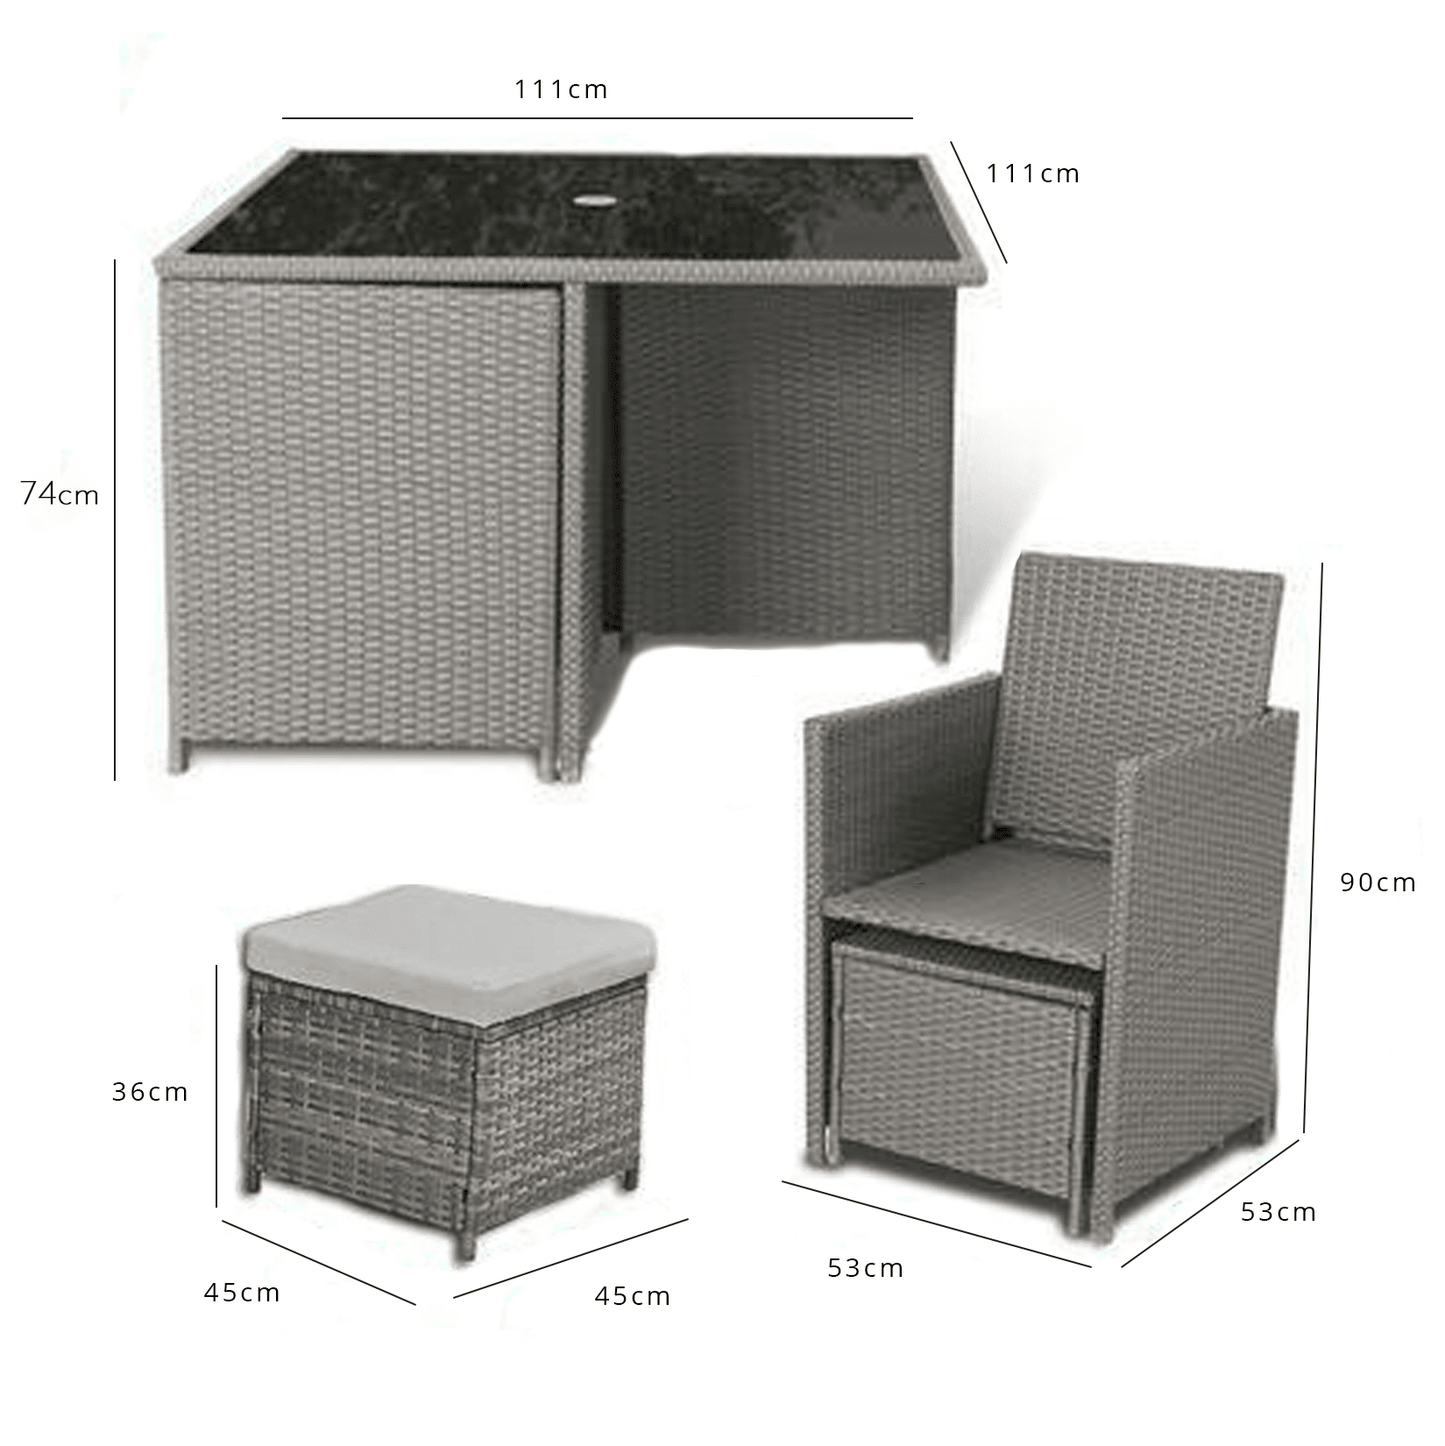 8 Seat Rattan Cube Outdoor Dining Set with LED Premium Parasol and Parasol Rain Cover - Grey Weave - Laura James